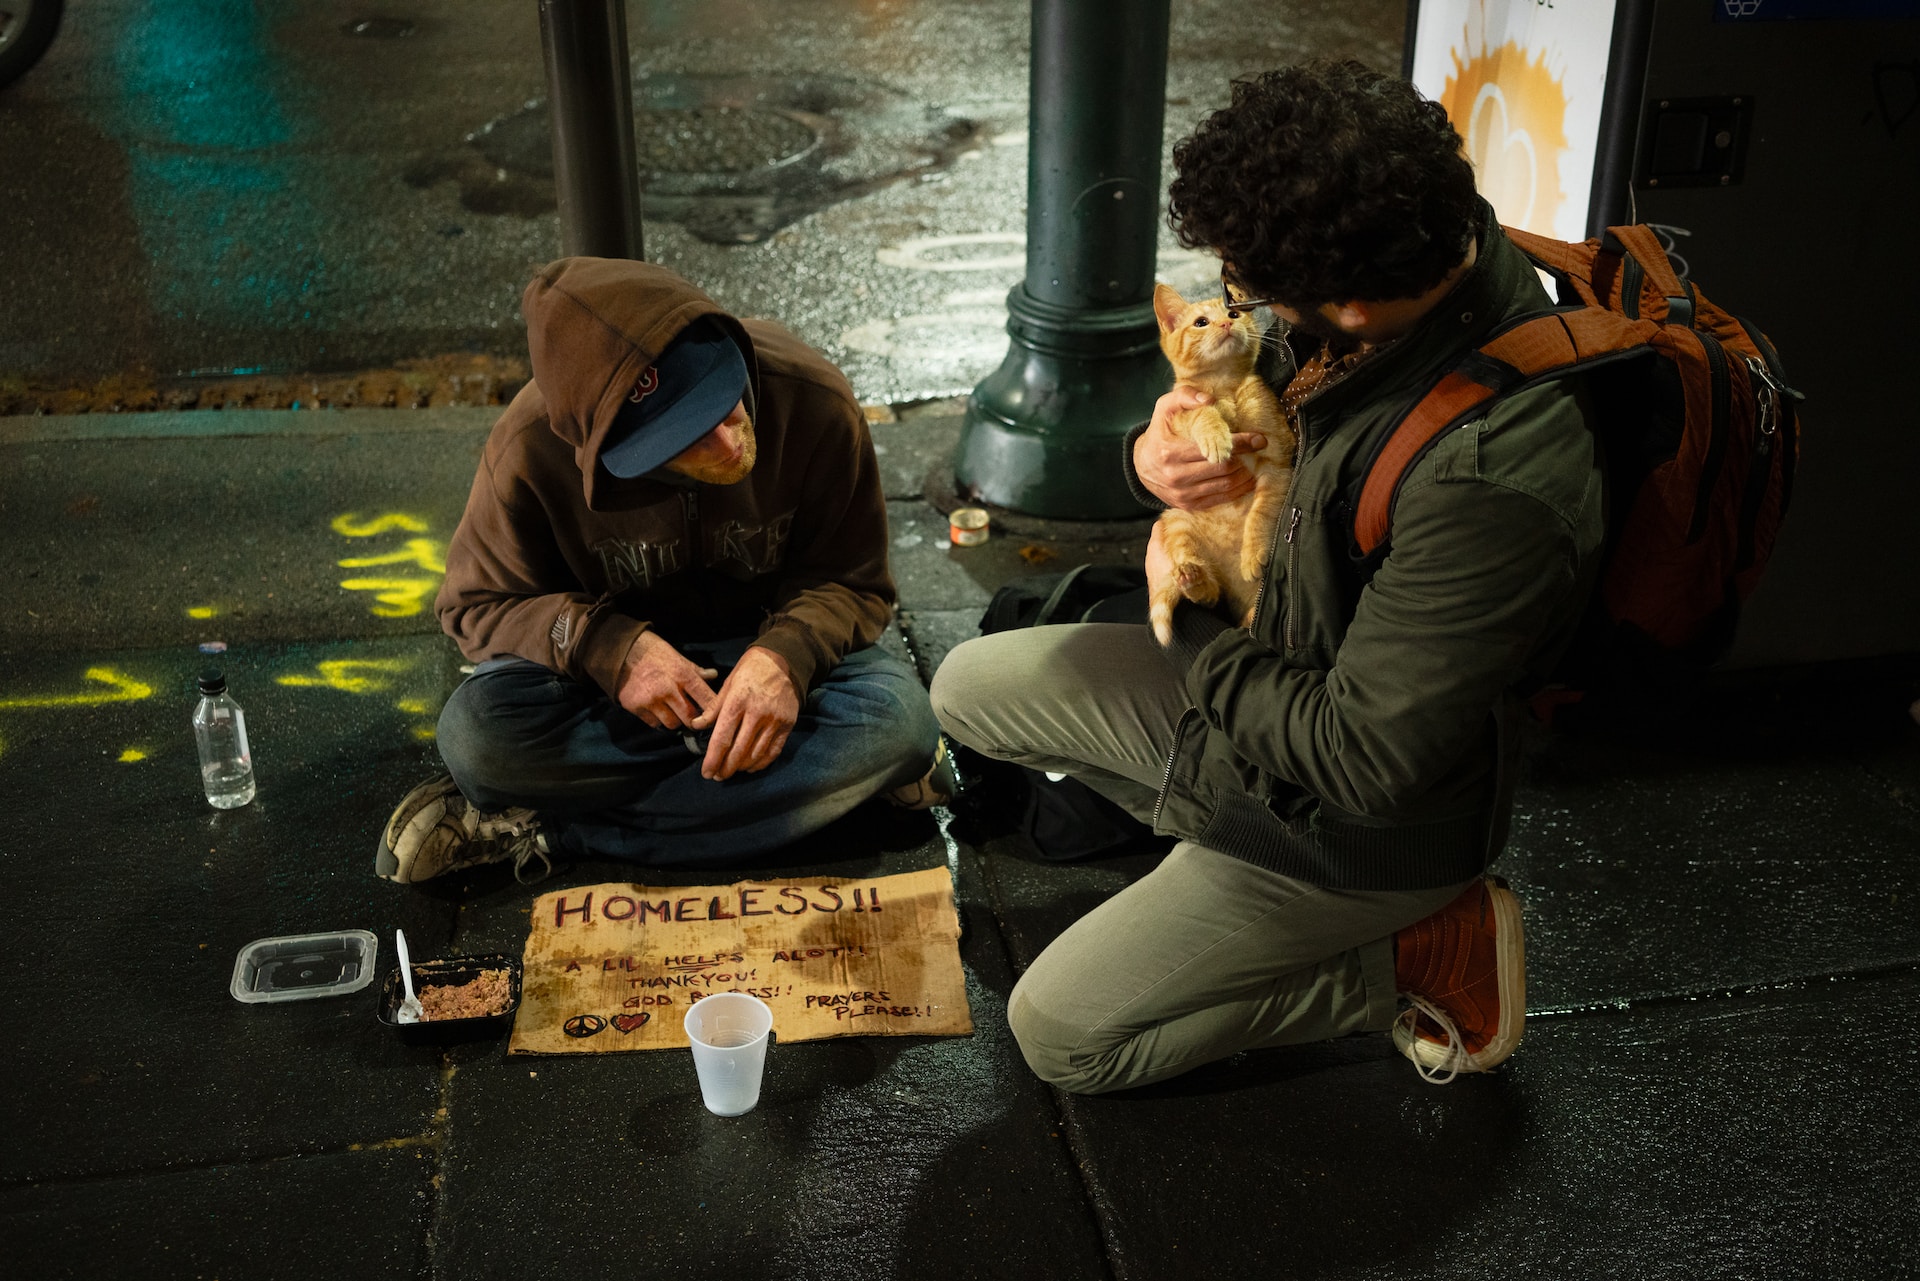 helping a homeless person